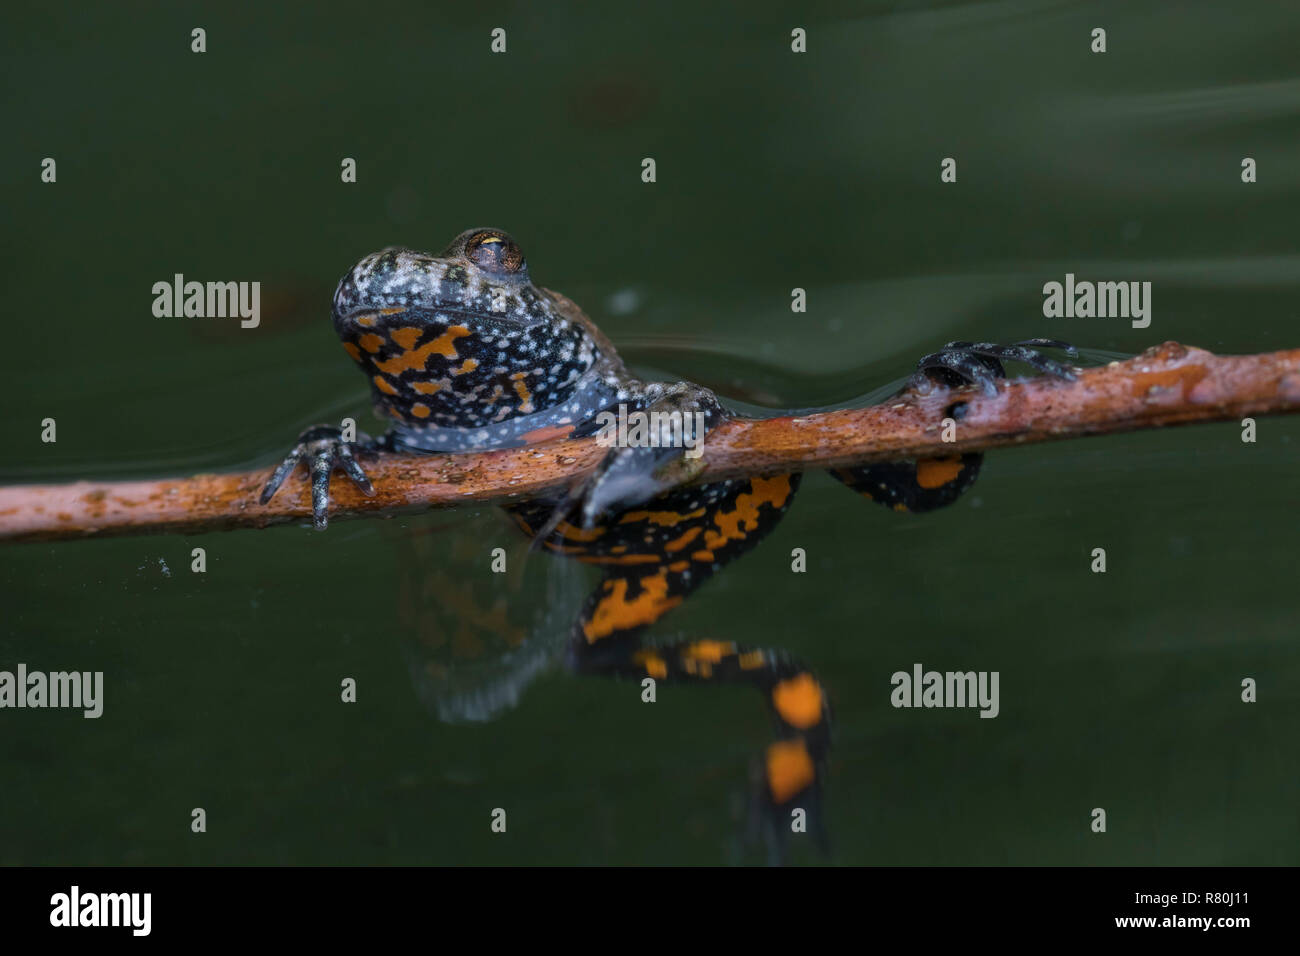 Fire-bellied toad (Bombina bombina) in a pond, showing warning colors. Germany Stock Photo